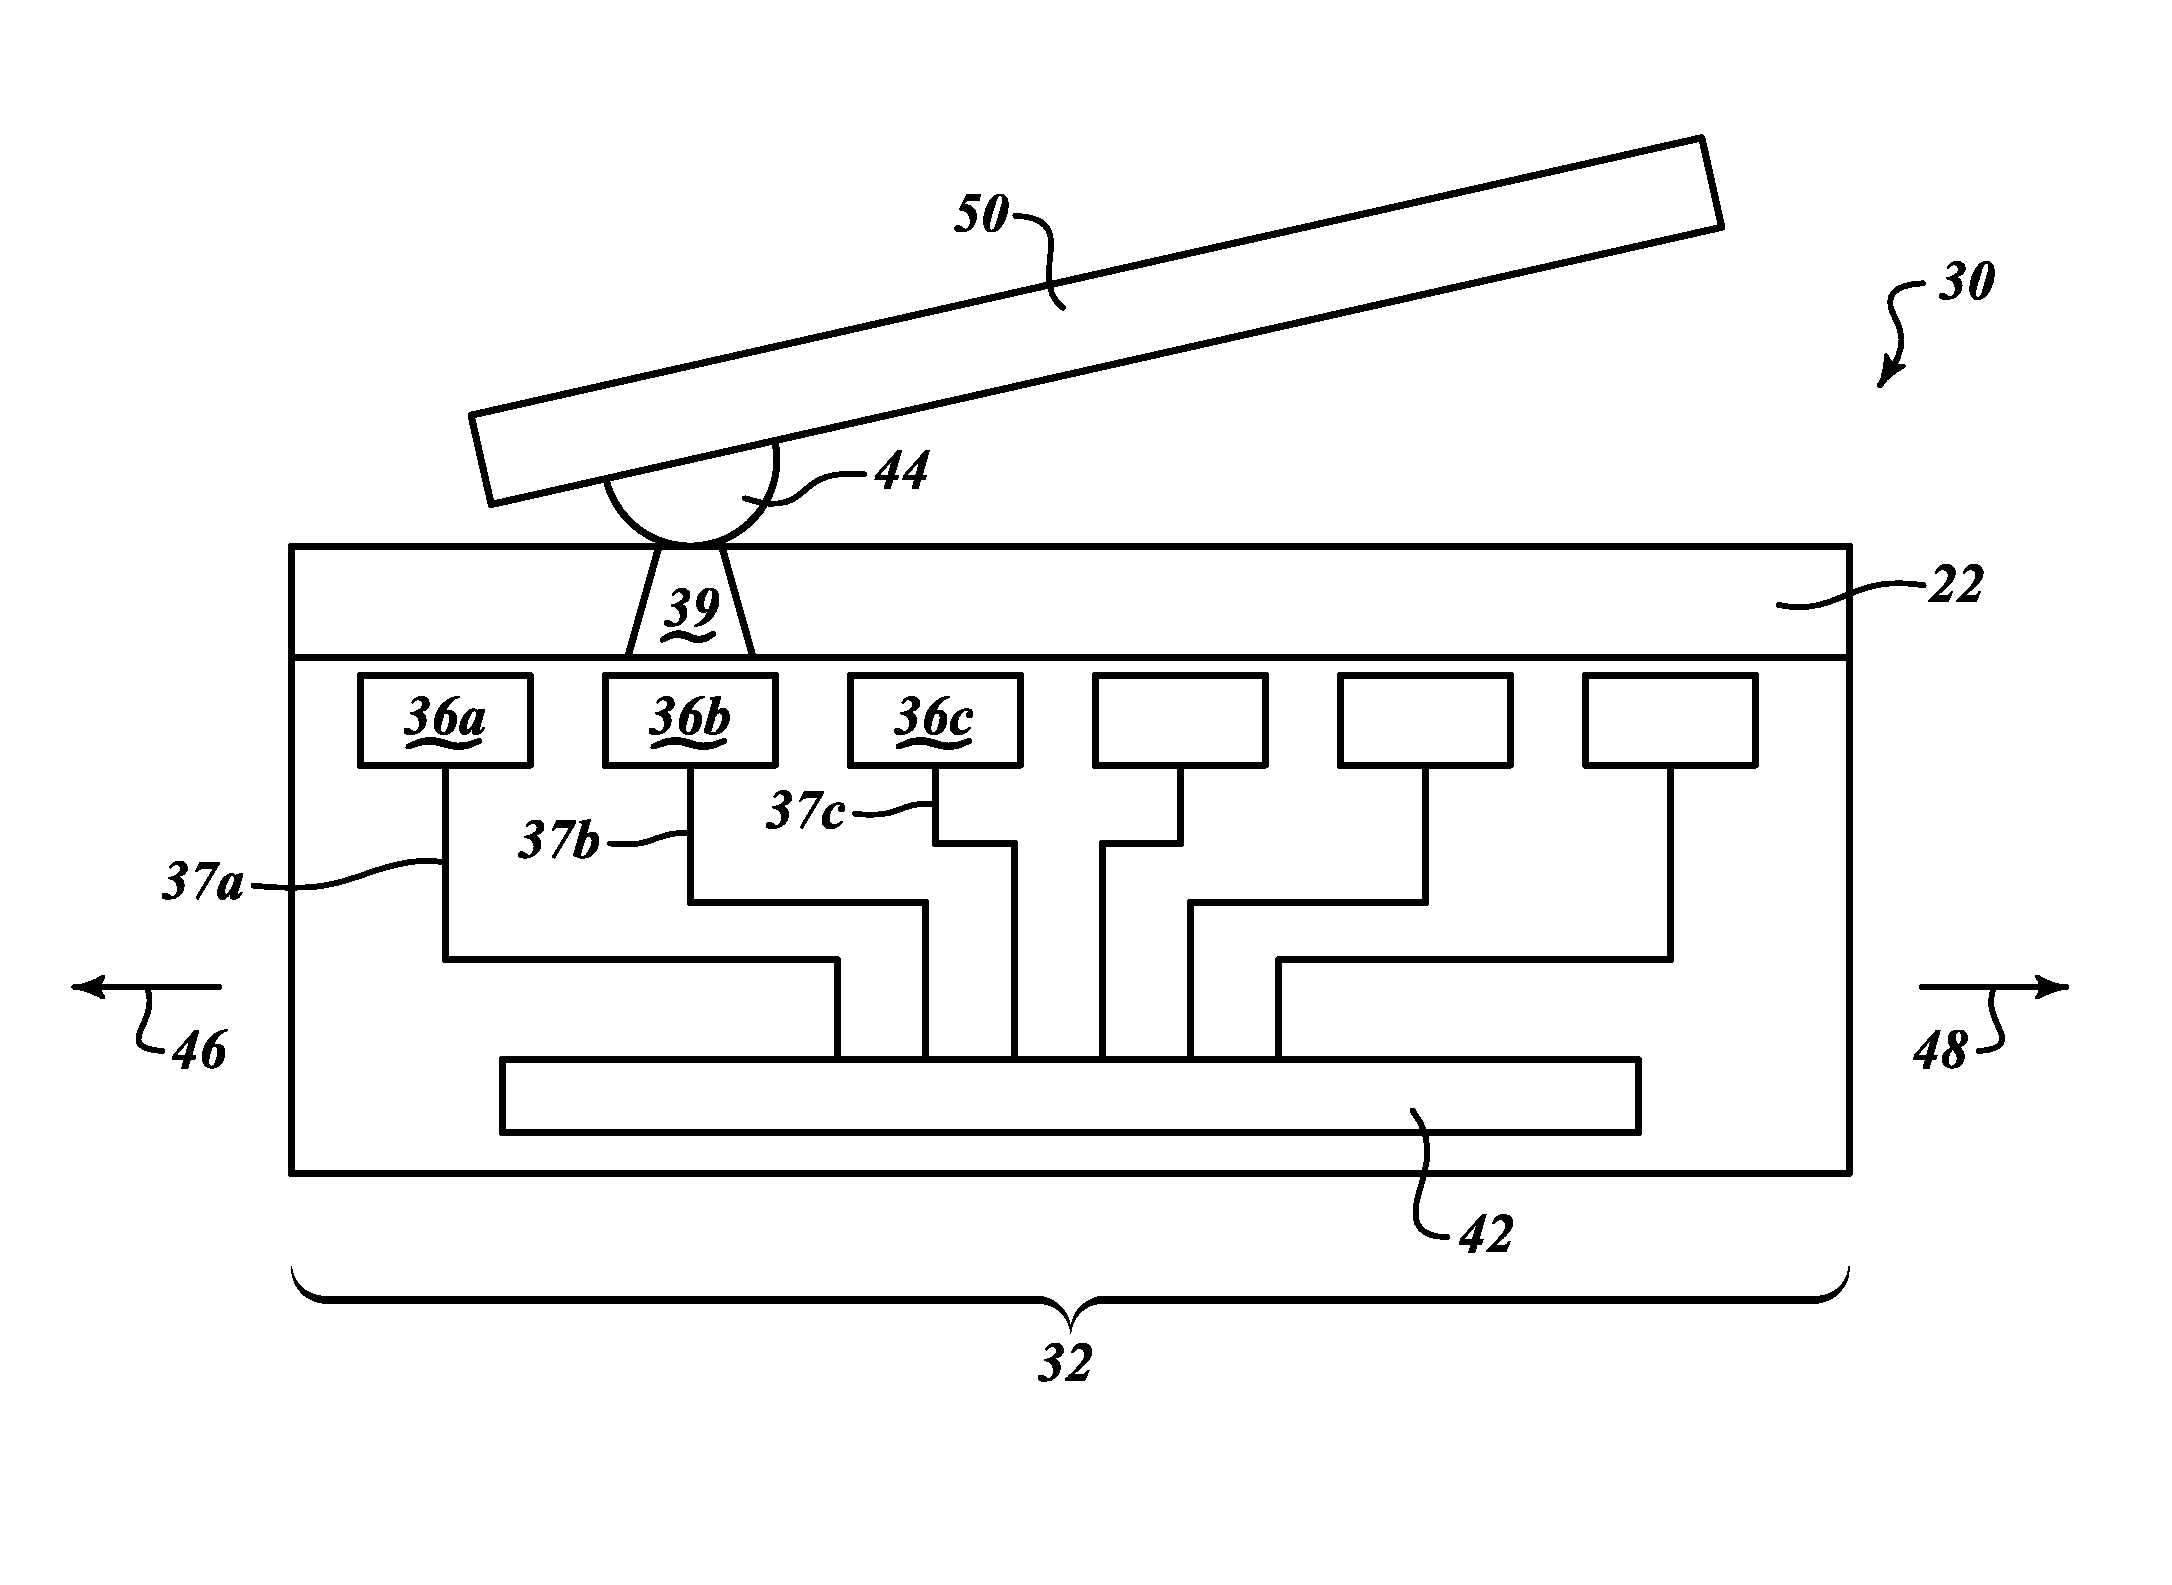 Phase change memory devices, method for encoding, and methods for storing data